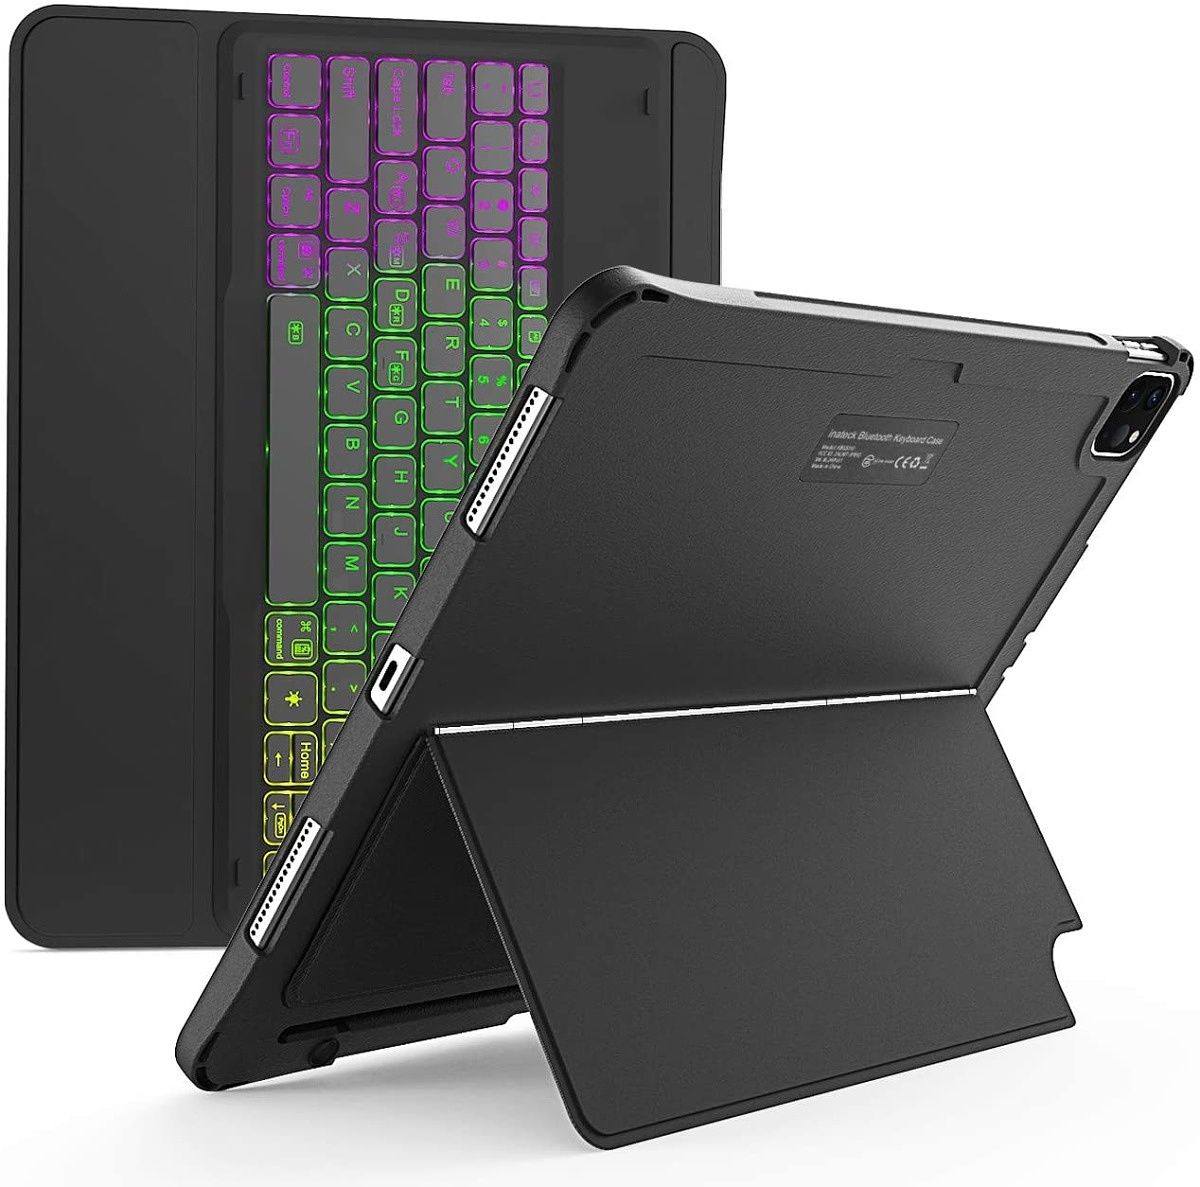 If you constantly change the orientation of your iPad at work, this tablet is a great choice. The Inateck keyboard case offers an incredibly flexible and stable kickstand. In addition, the case offers RGB backlit keys as well.